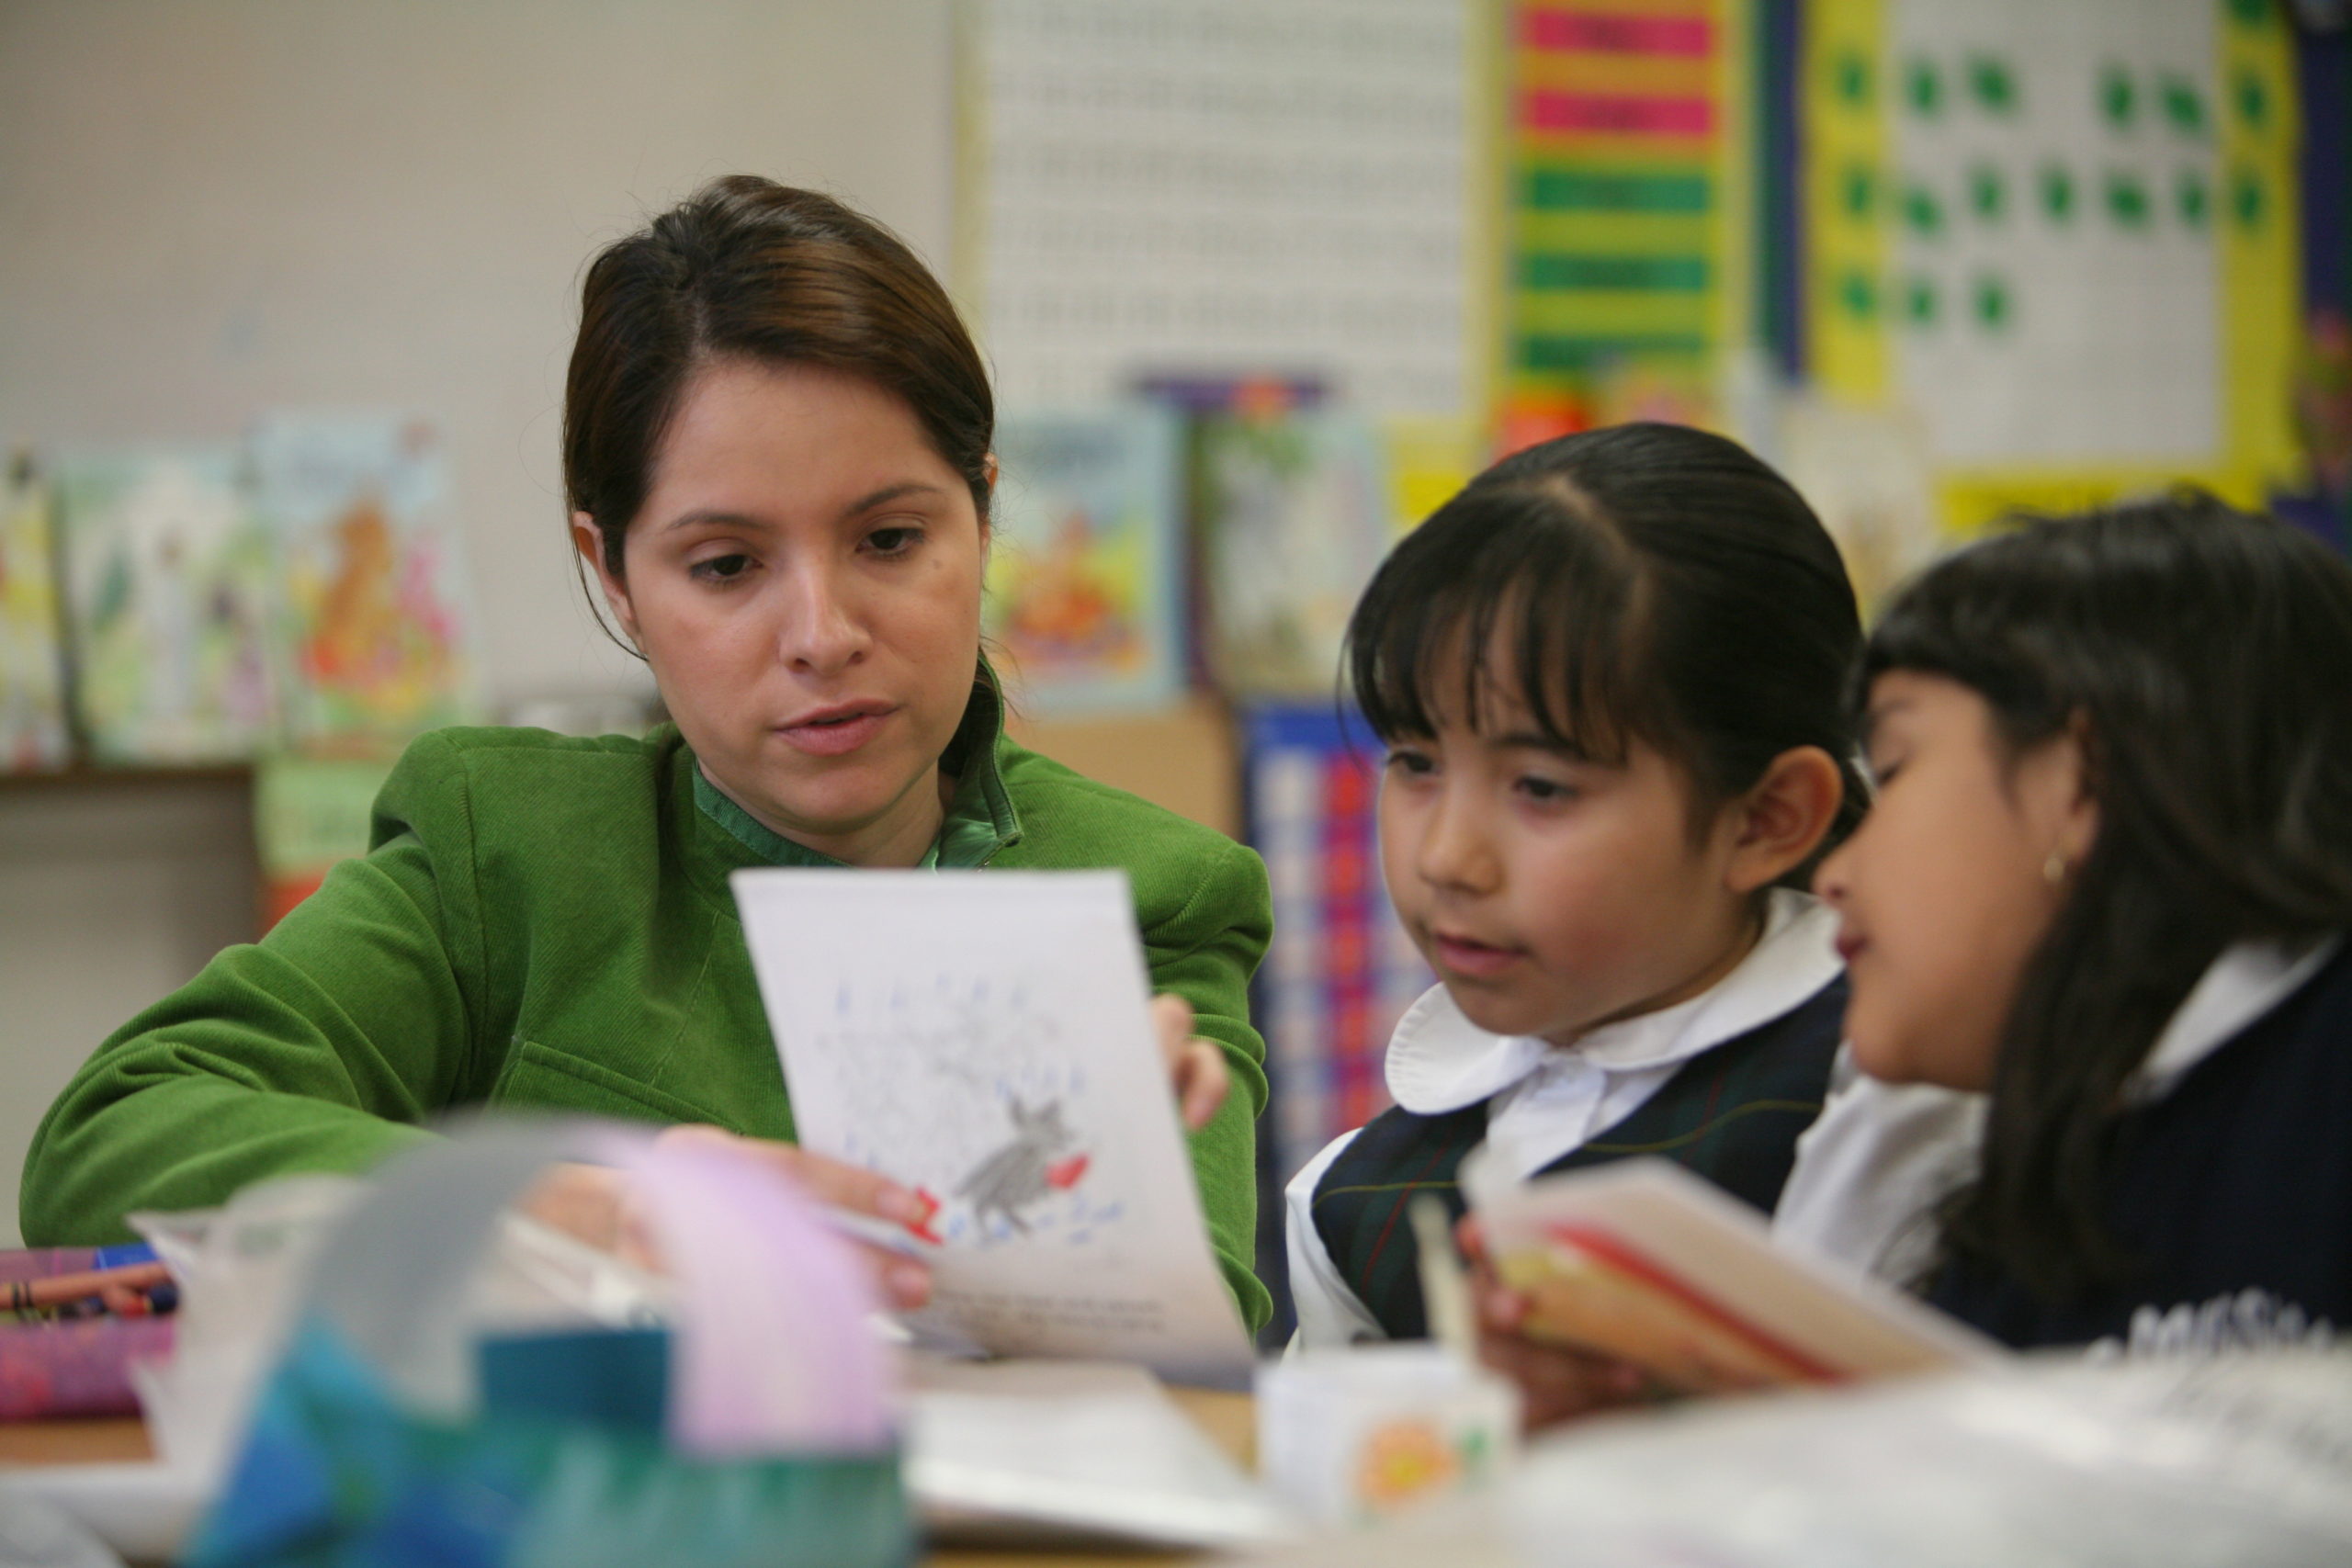 Candid views of classes, teachers and students of the Dolores MIssion School in Los Angeles.